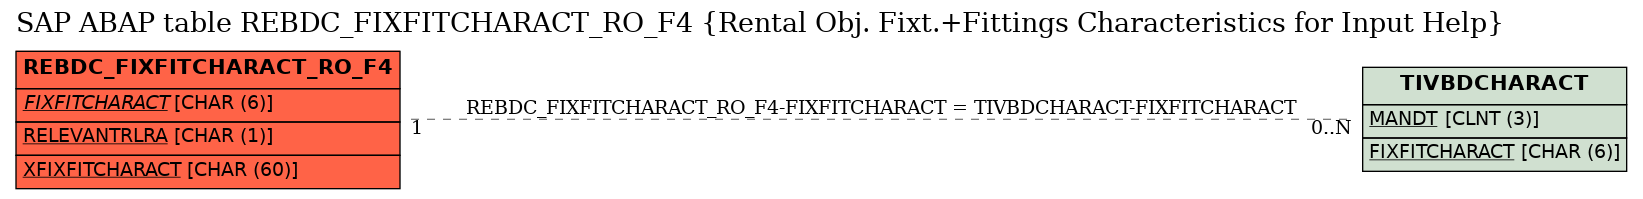 E-R Diagram for table REBDC_FIXFITCHARACT_RO_F4 (Rental Obj. Fixt.+Fittings Characteristics for Input Help)